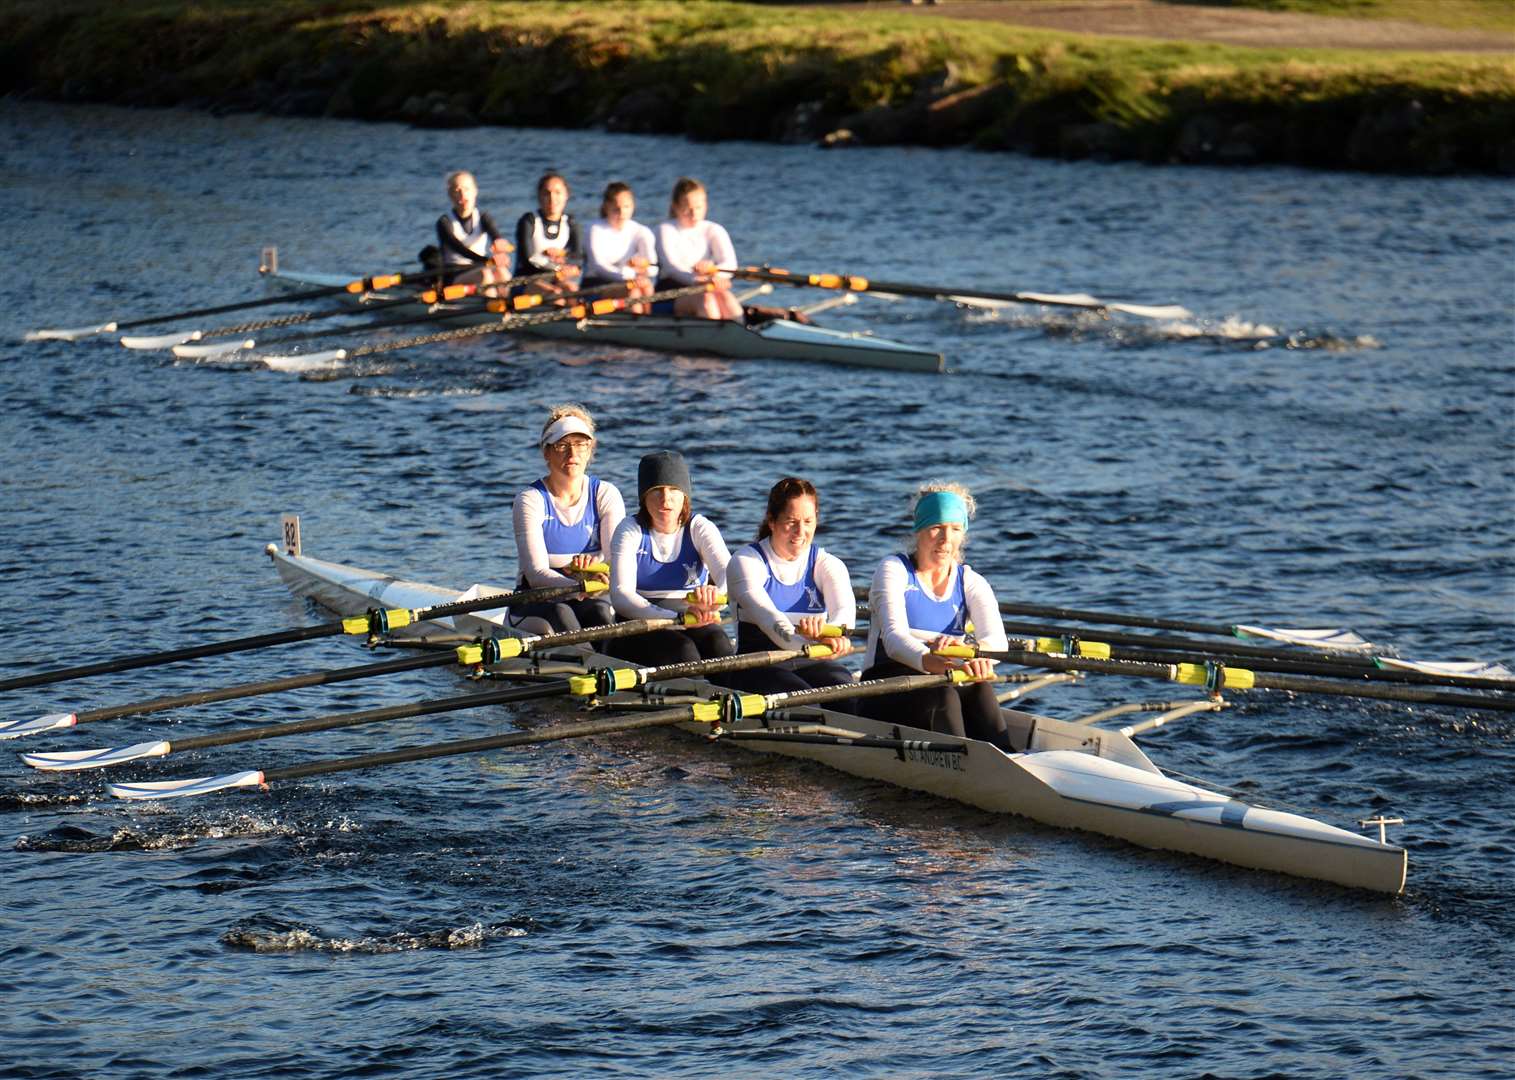 Inverness Rowing Club event on the Caledonian Canal.